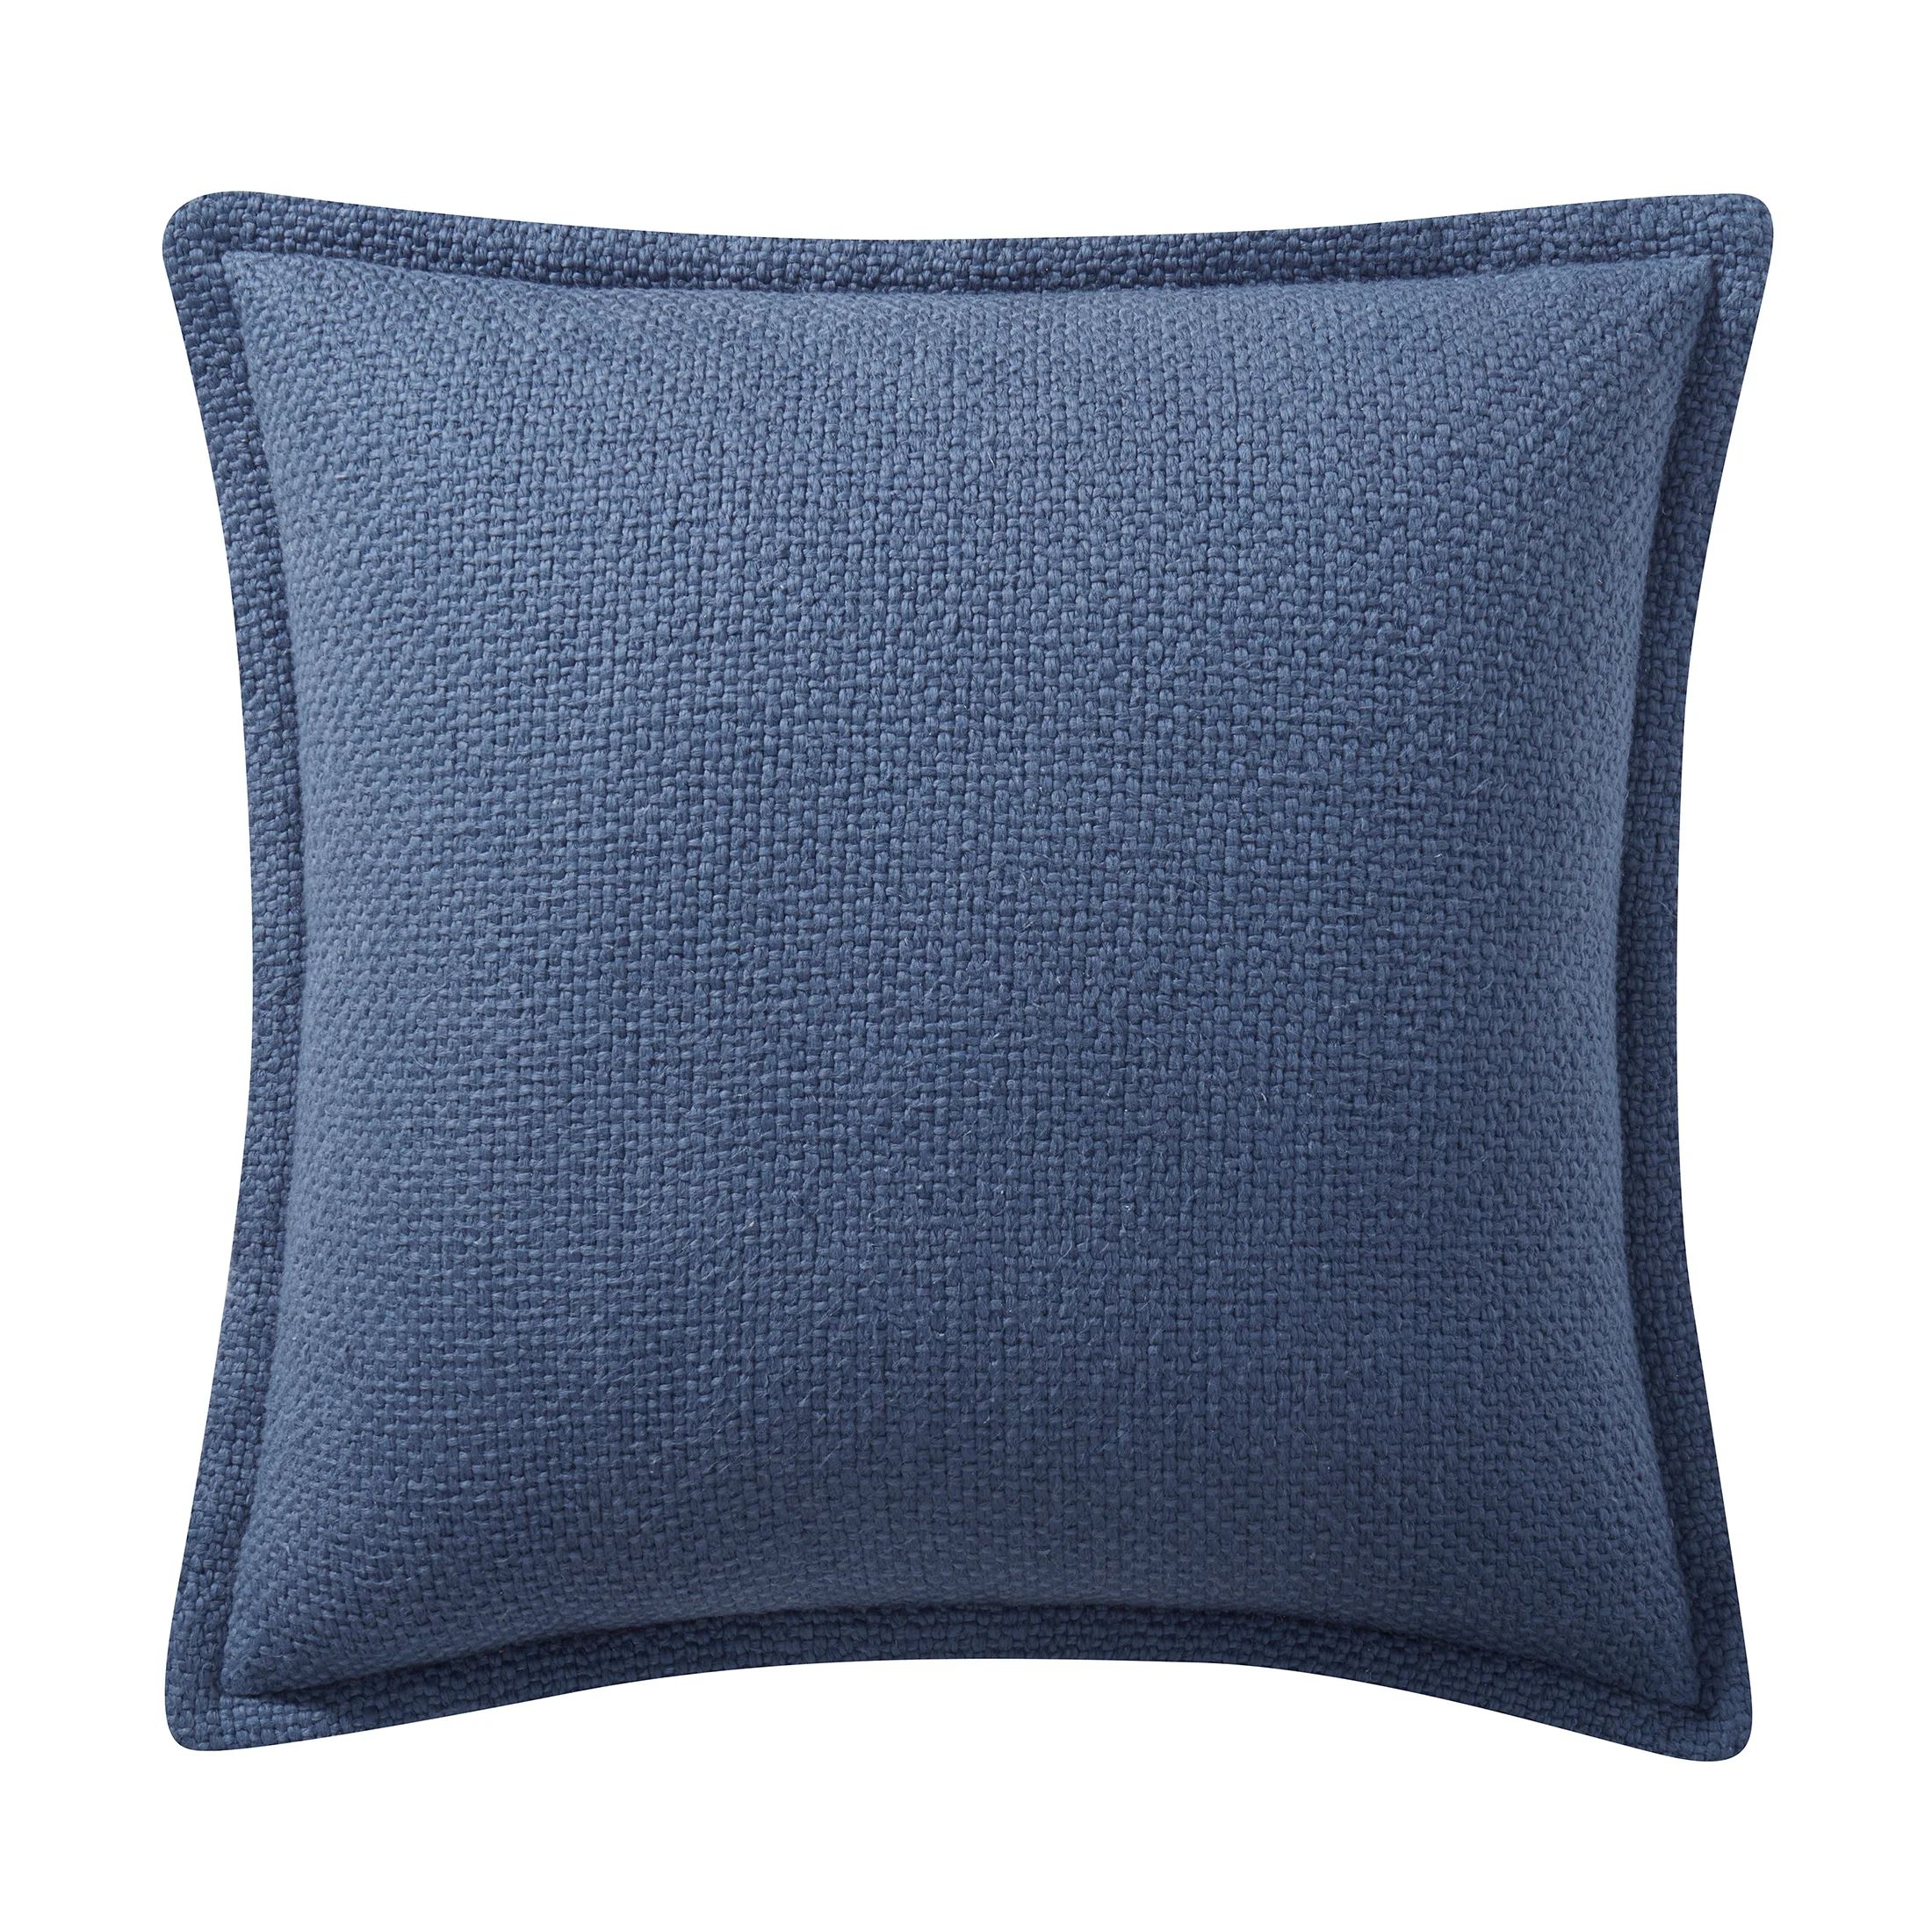 My Texas House 20" x 20" Andie Reversible Solid Blue Cotton Decorative Pillow | Walmart (US)